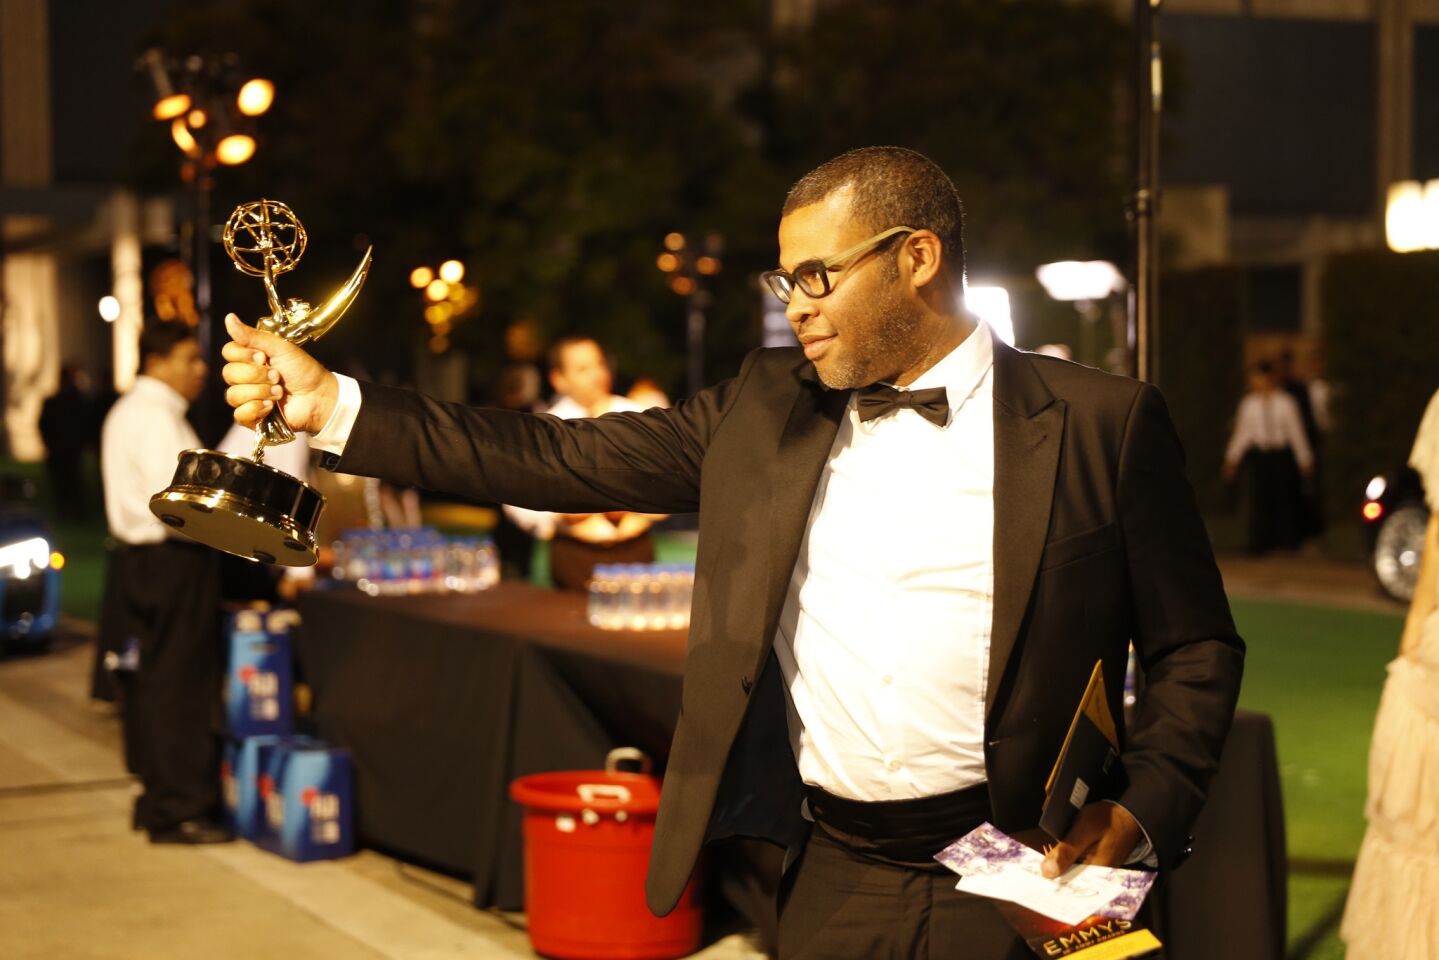 Jordan Peele at the Governors Ball after the 68th Primetime Emmy Awards on Sept. 18, 2016.